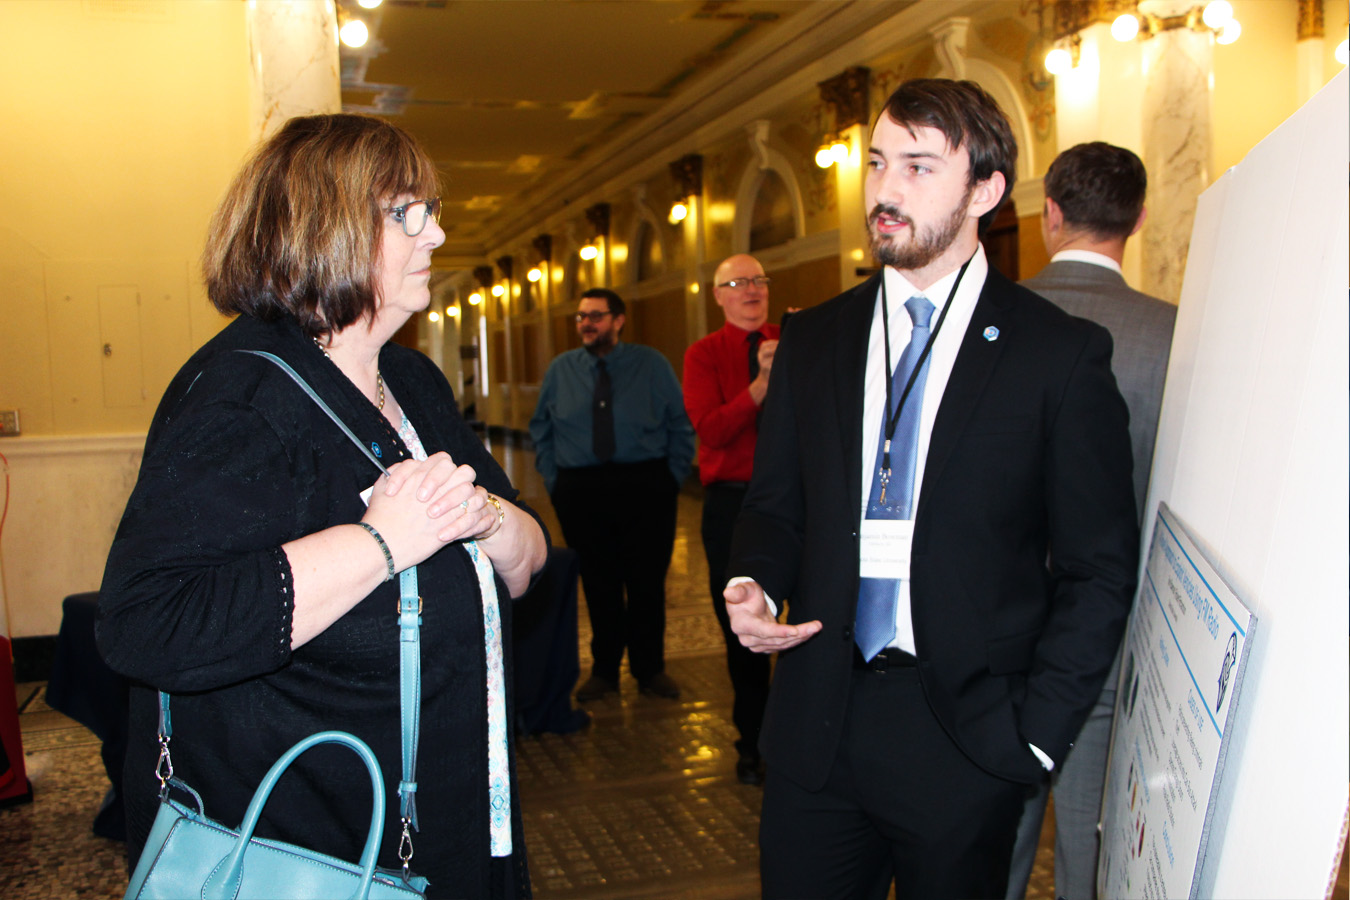 Ben Bowman at the 2023 Legislative Research Day Student Poster Session